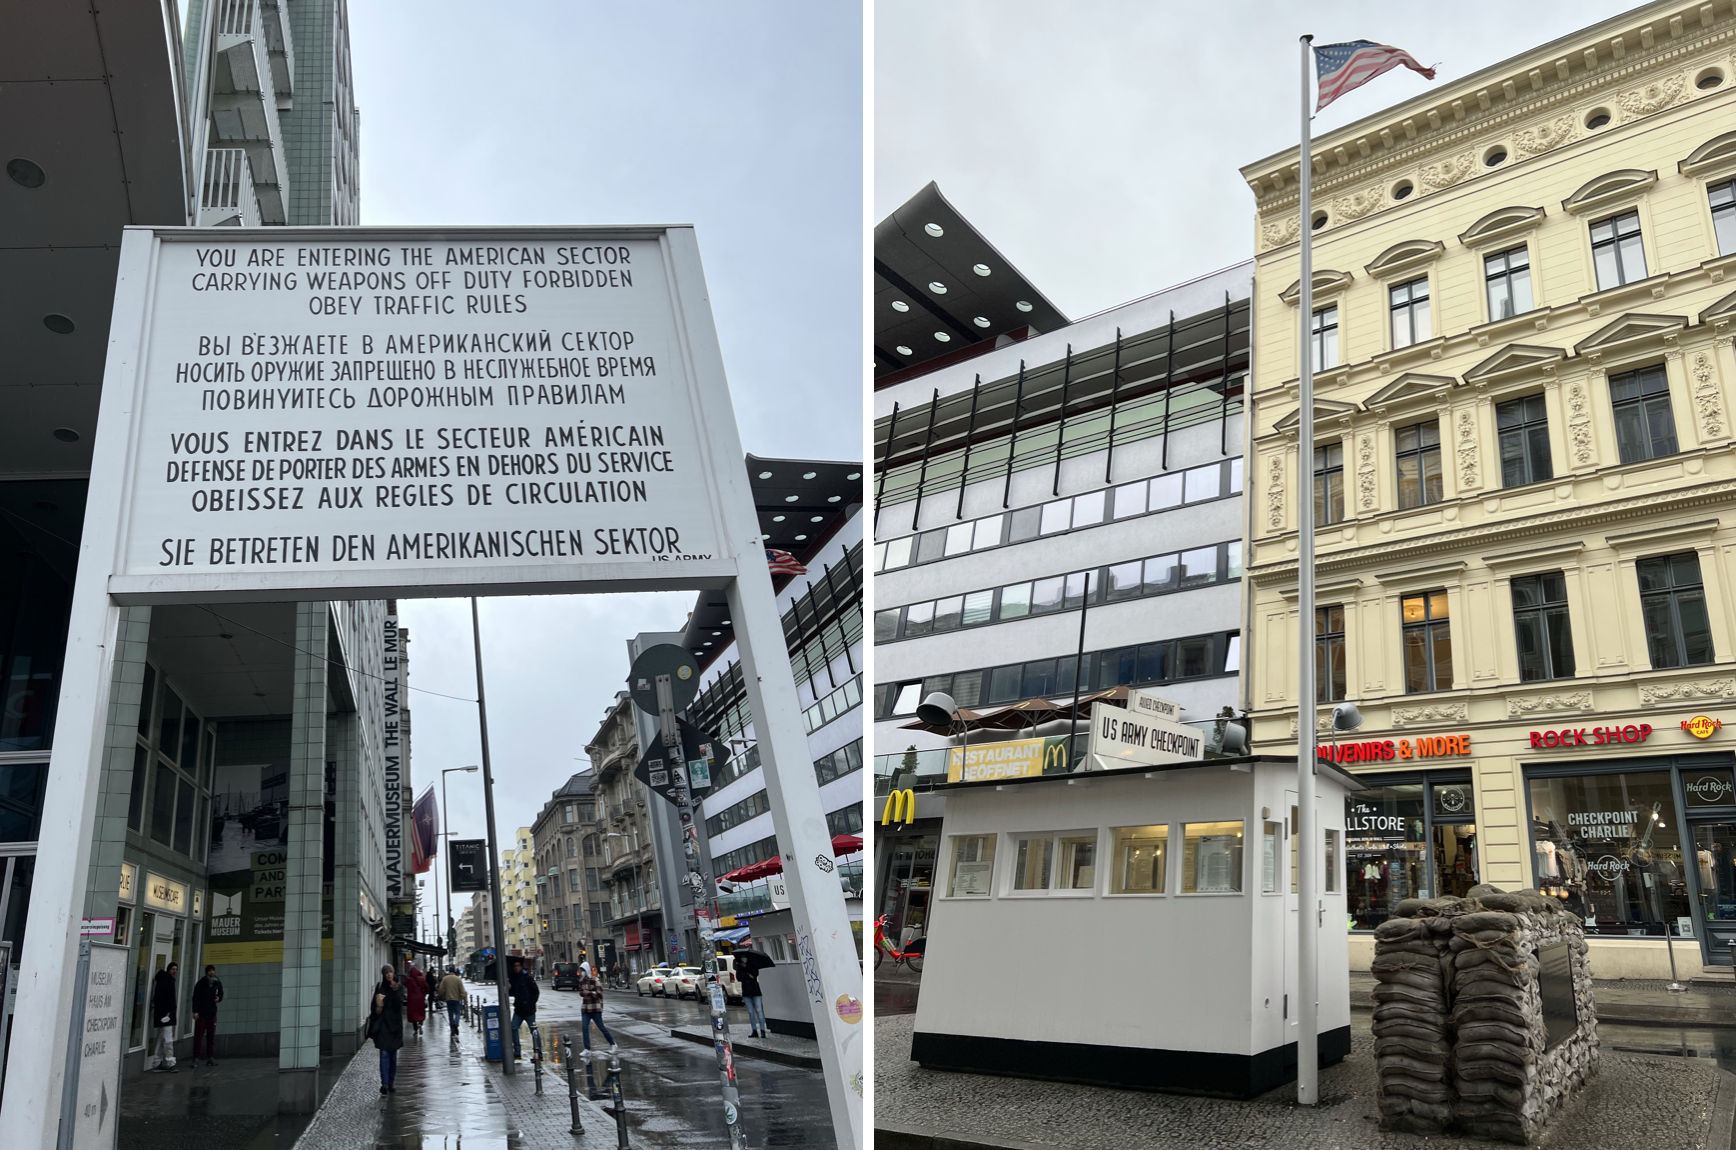 visiter berlin : decouvrir le checkpoint charlie